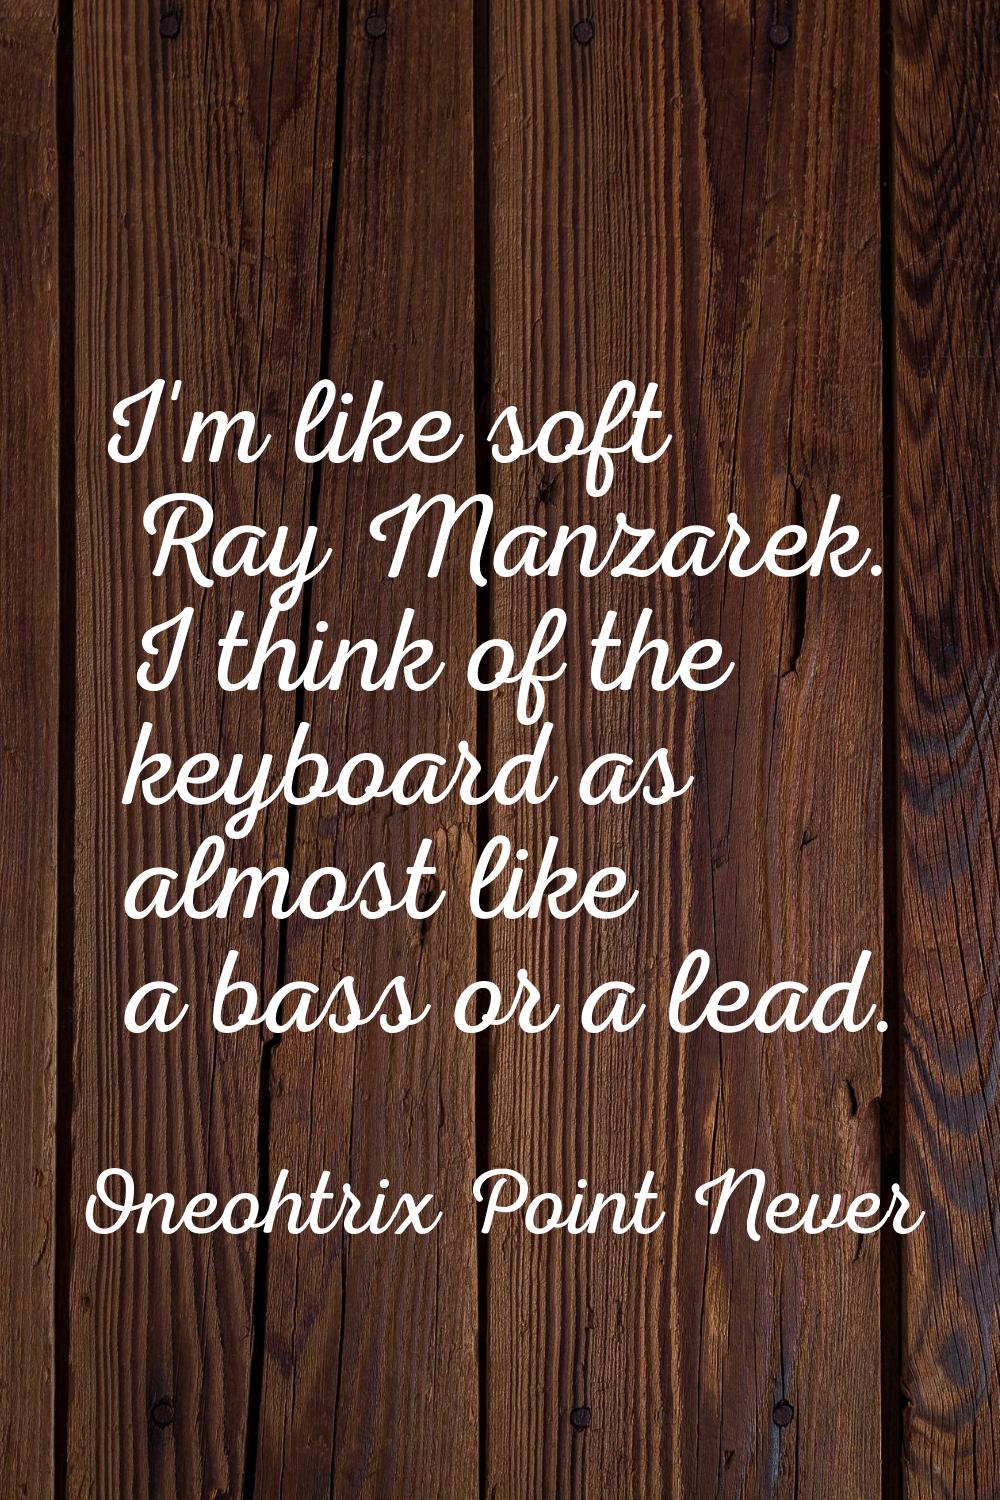 I'm like soft Ray Manzarek. I think of the keyboard as almost like a bass or a lead.